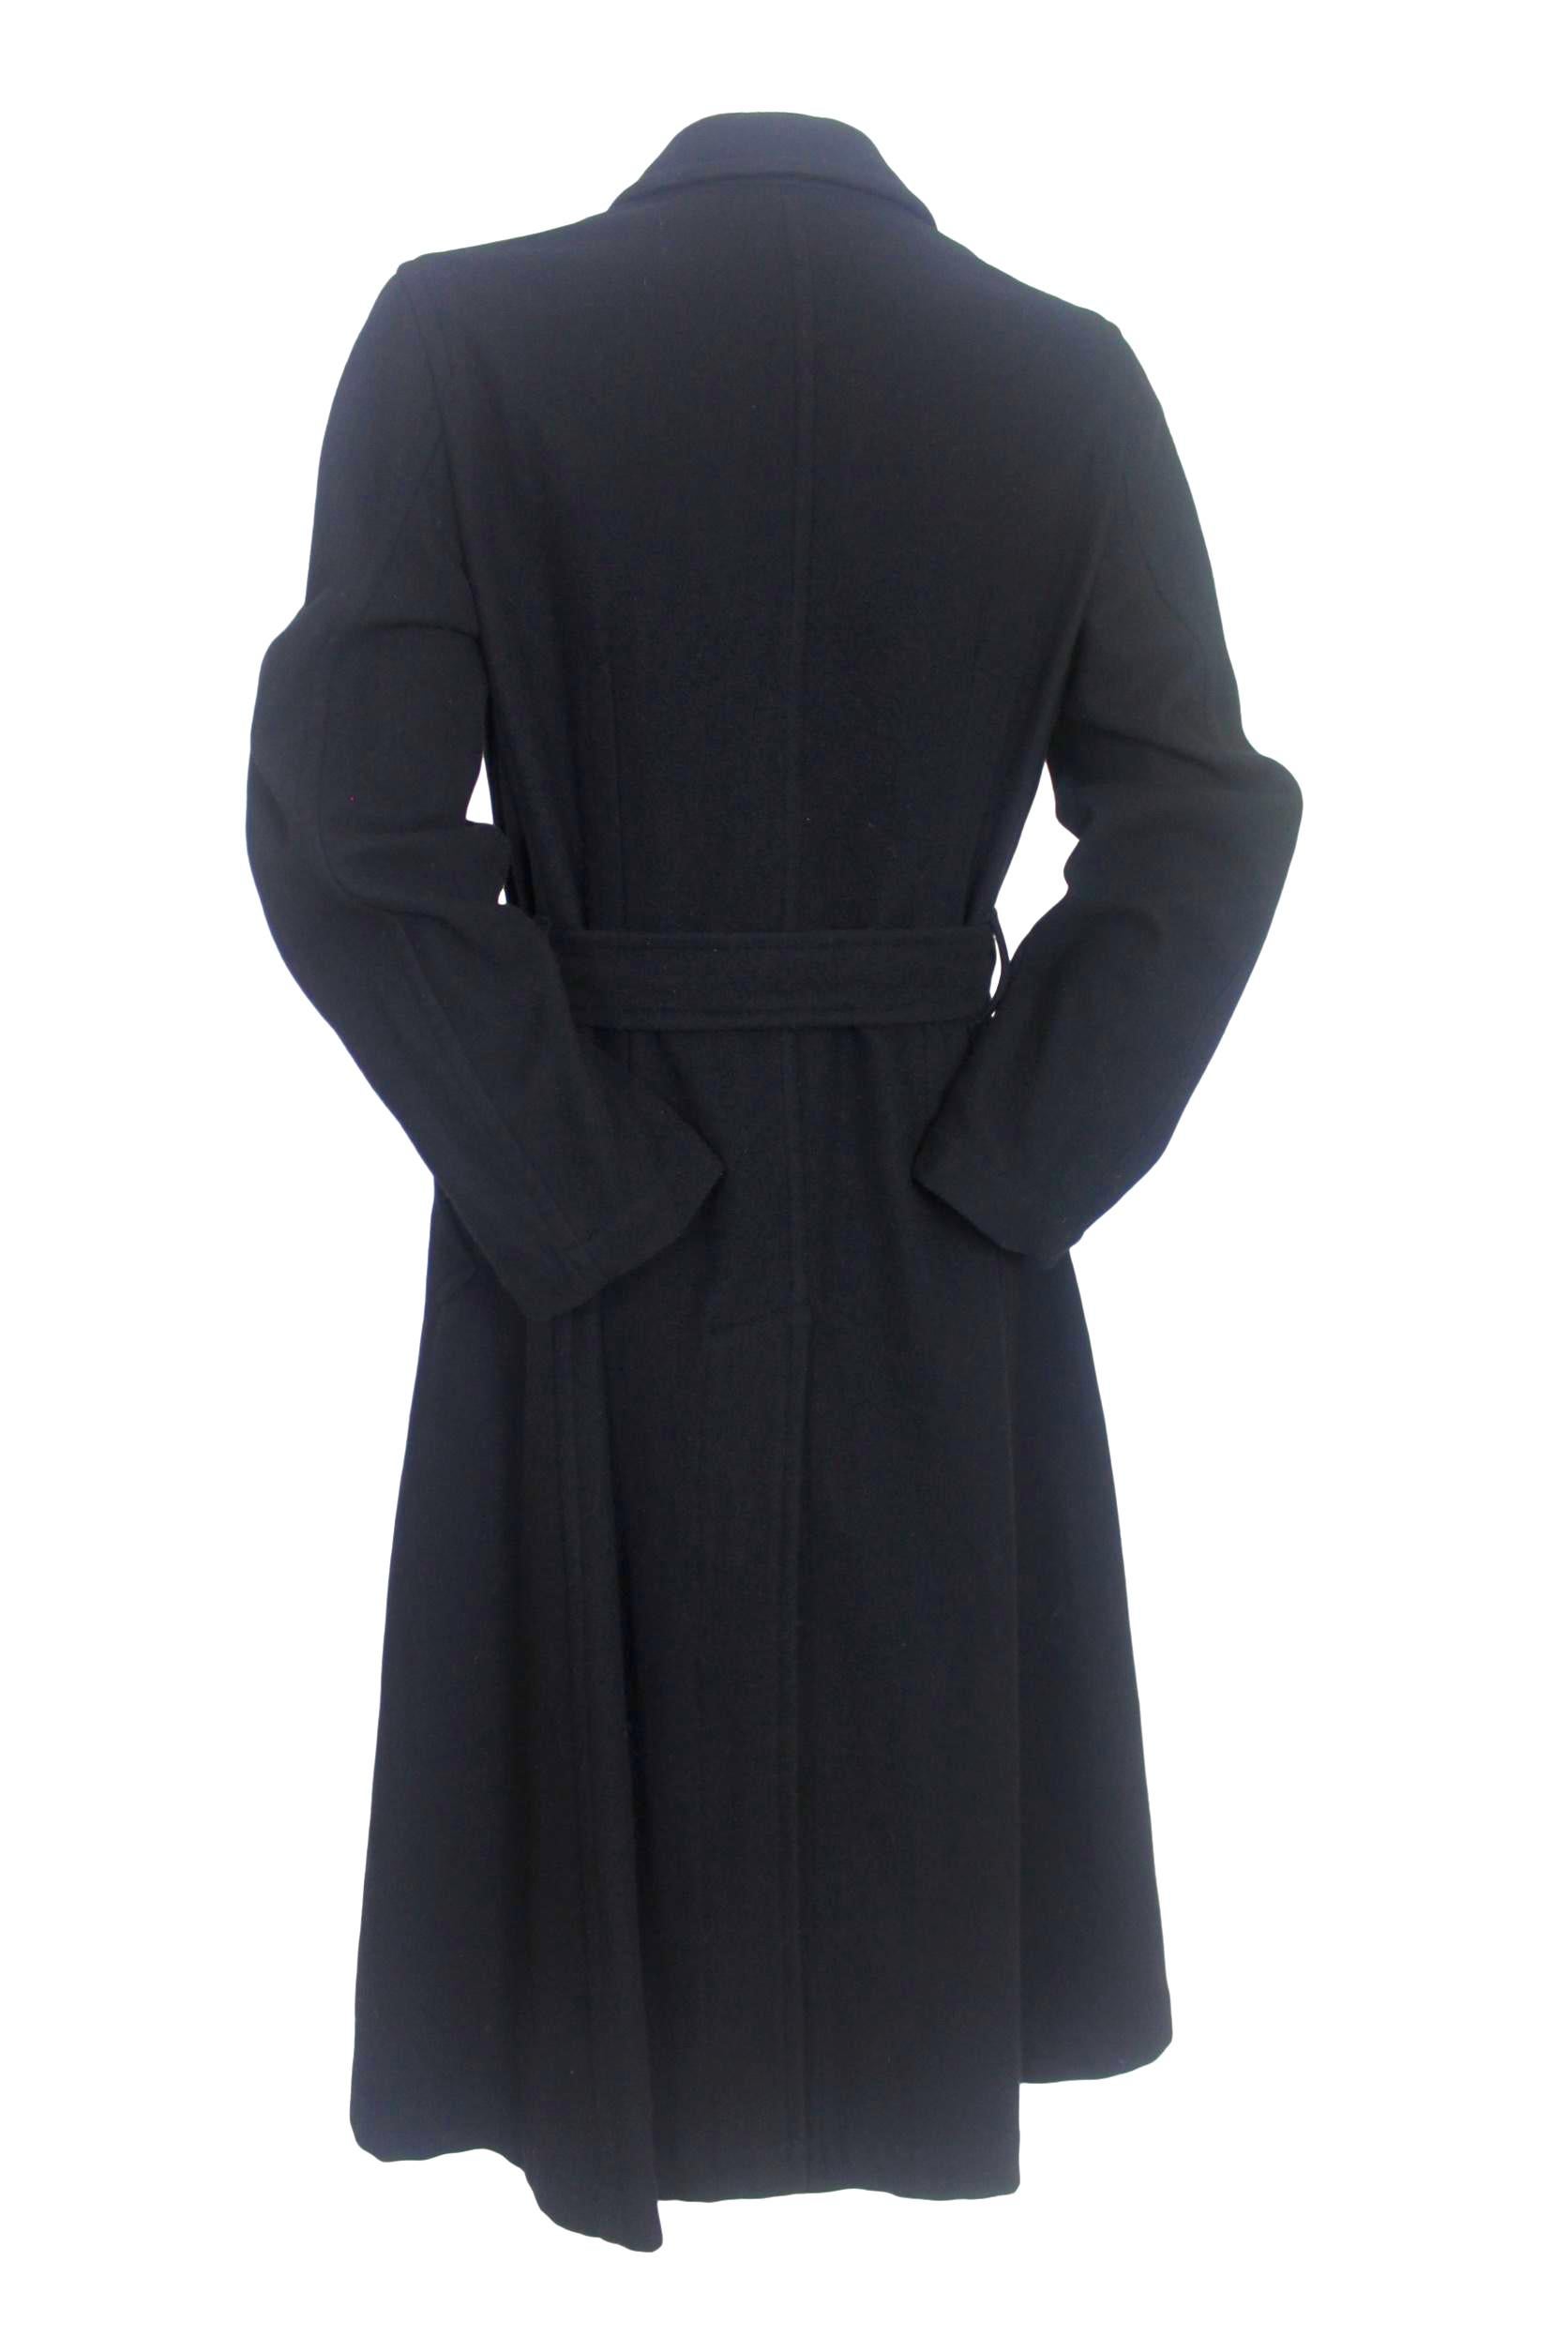 Comme des Garcons 2006 Collection Wool Coat with Bow Decoration For Sale 13